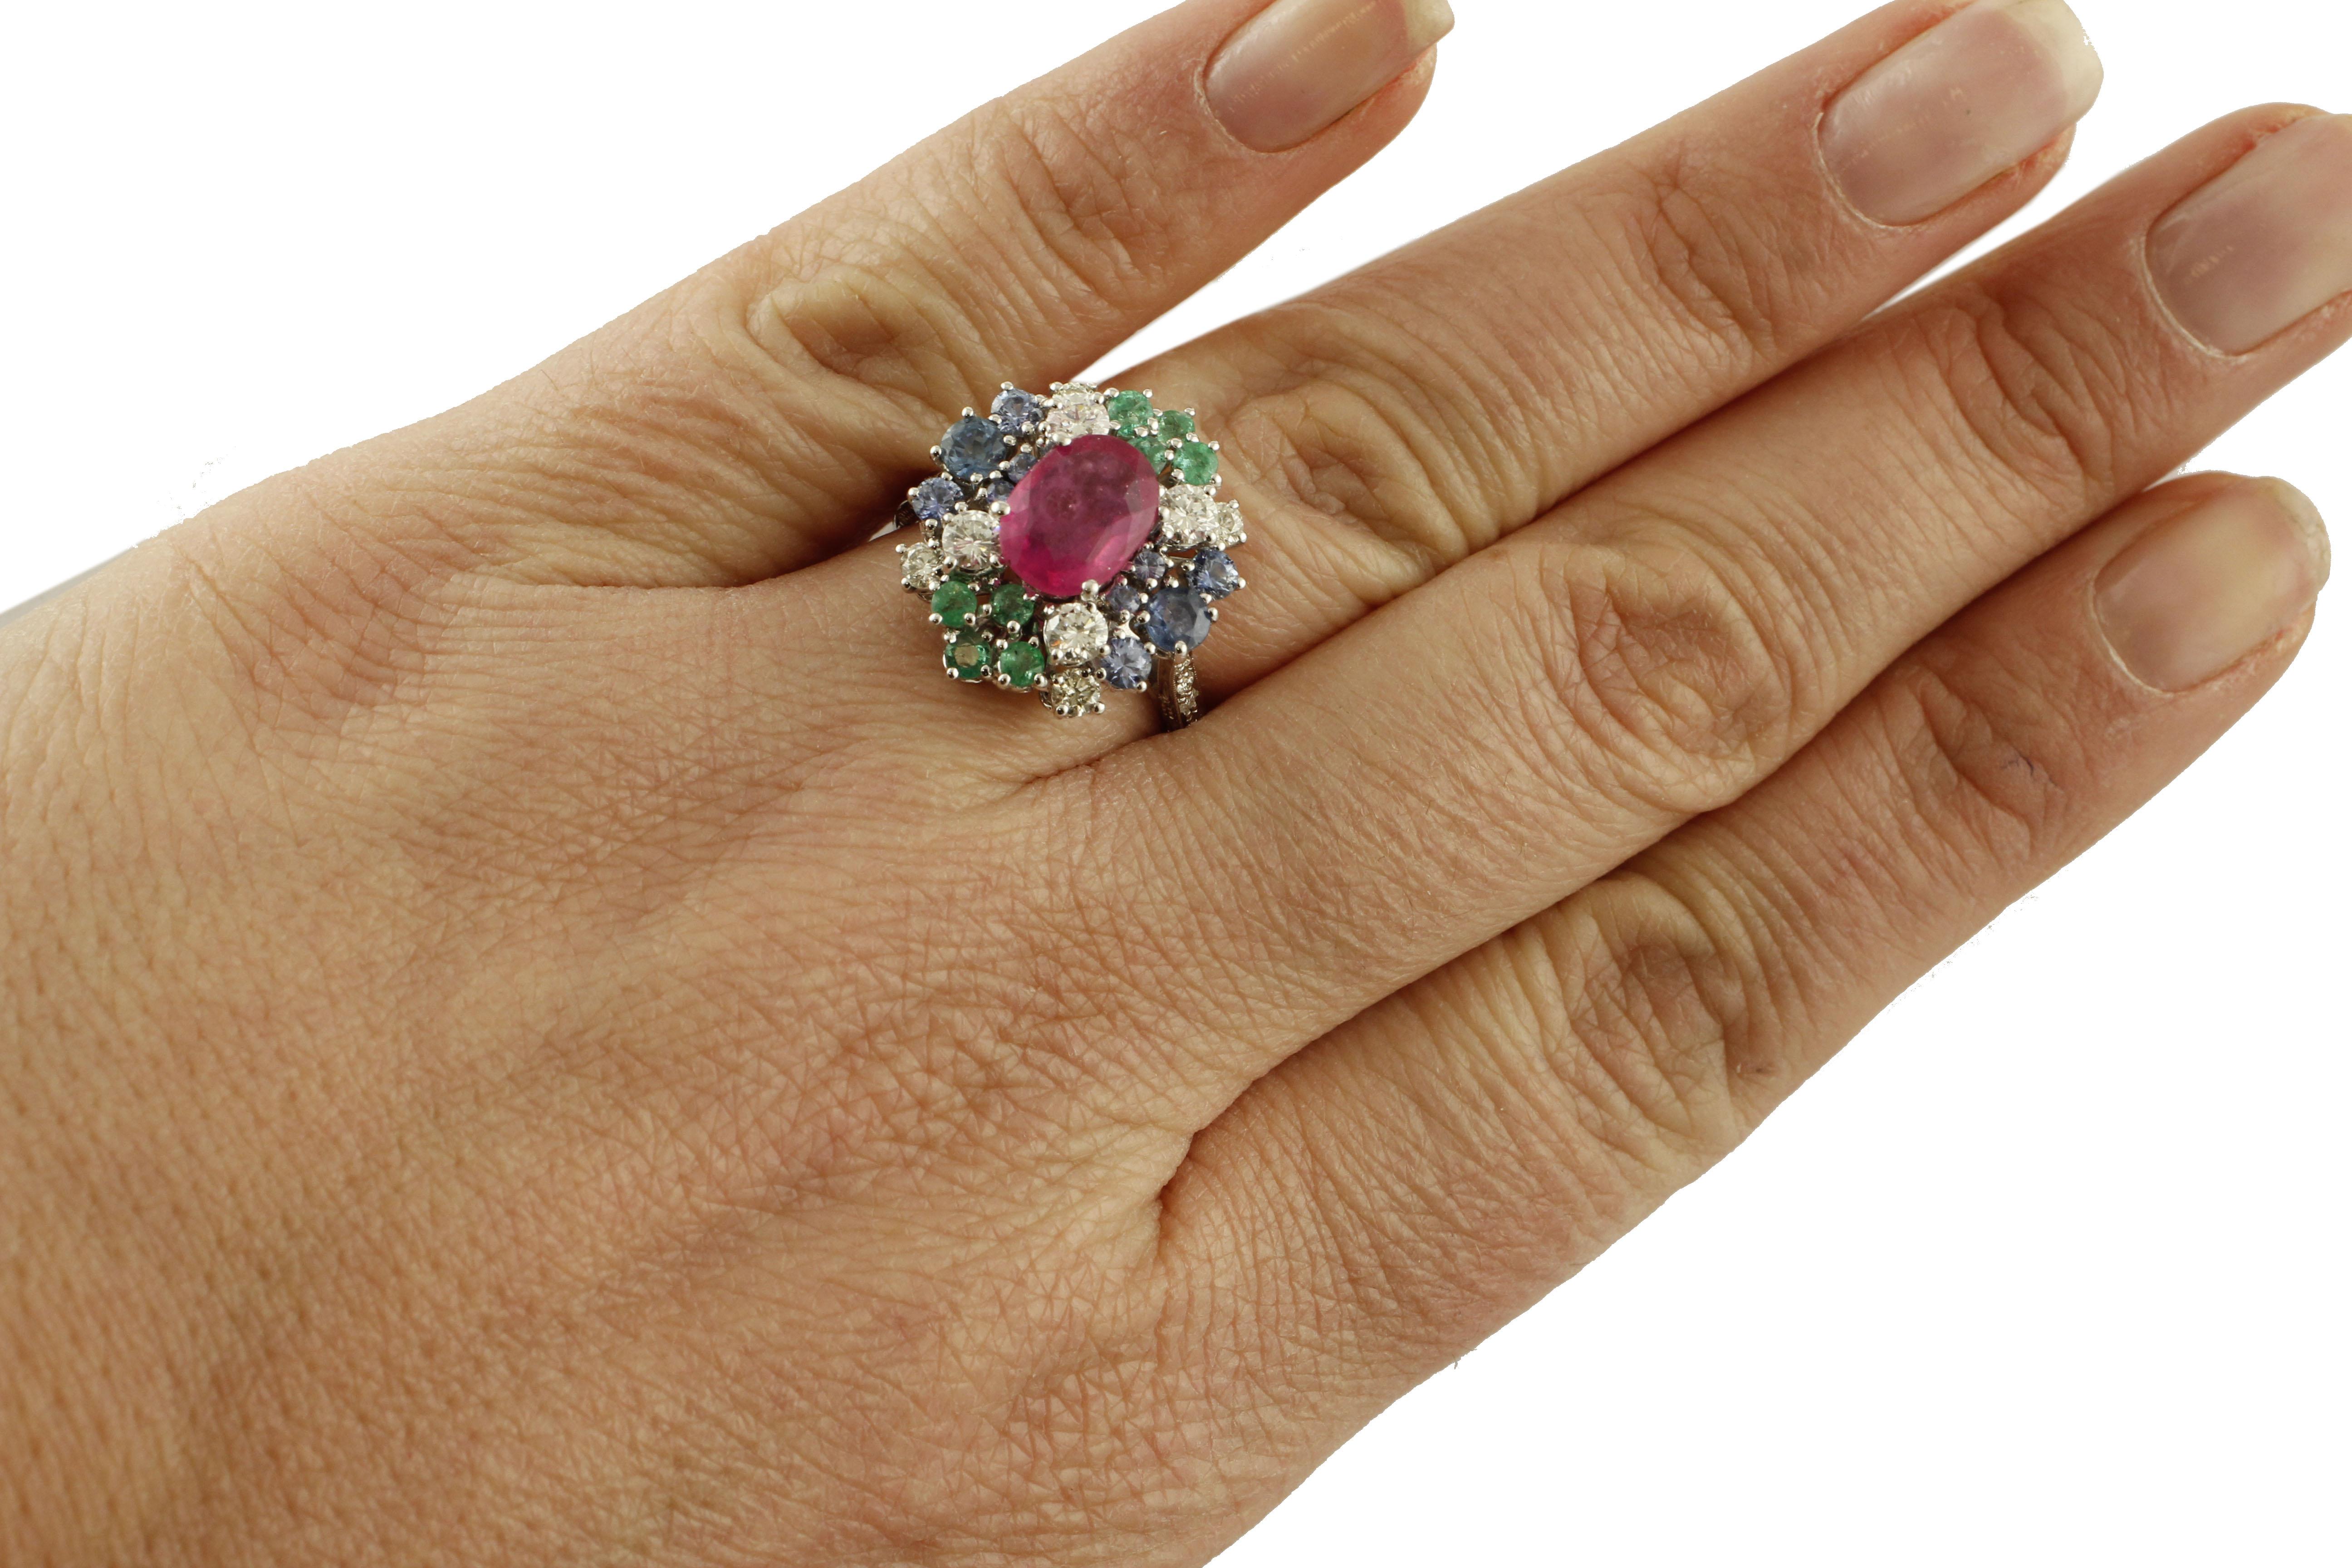 Mixed Cut Intense Central Ruby, Diamonds, Emeralds, Blue Sapphires White Gold Cluster Ring